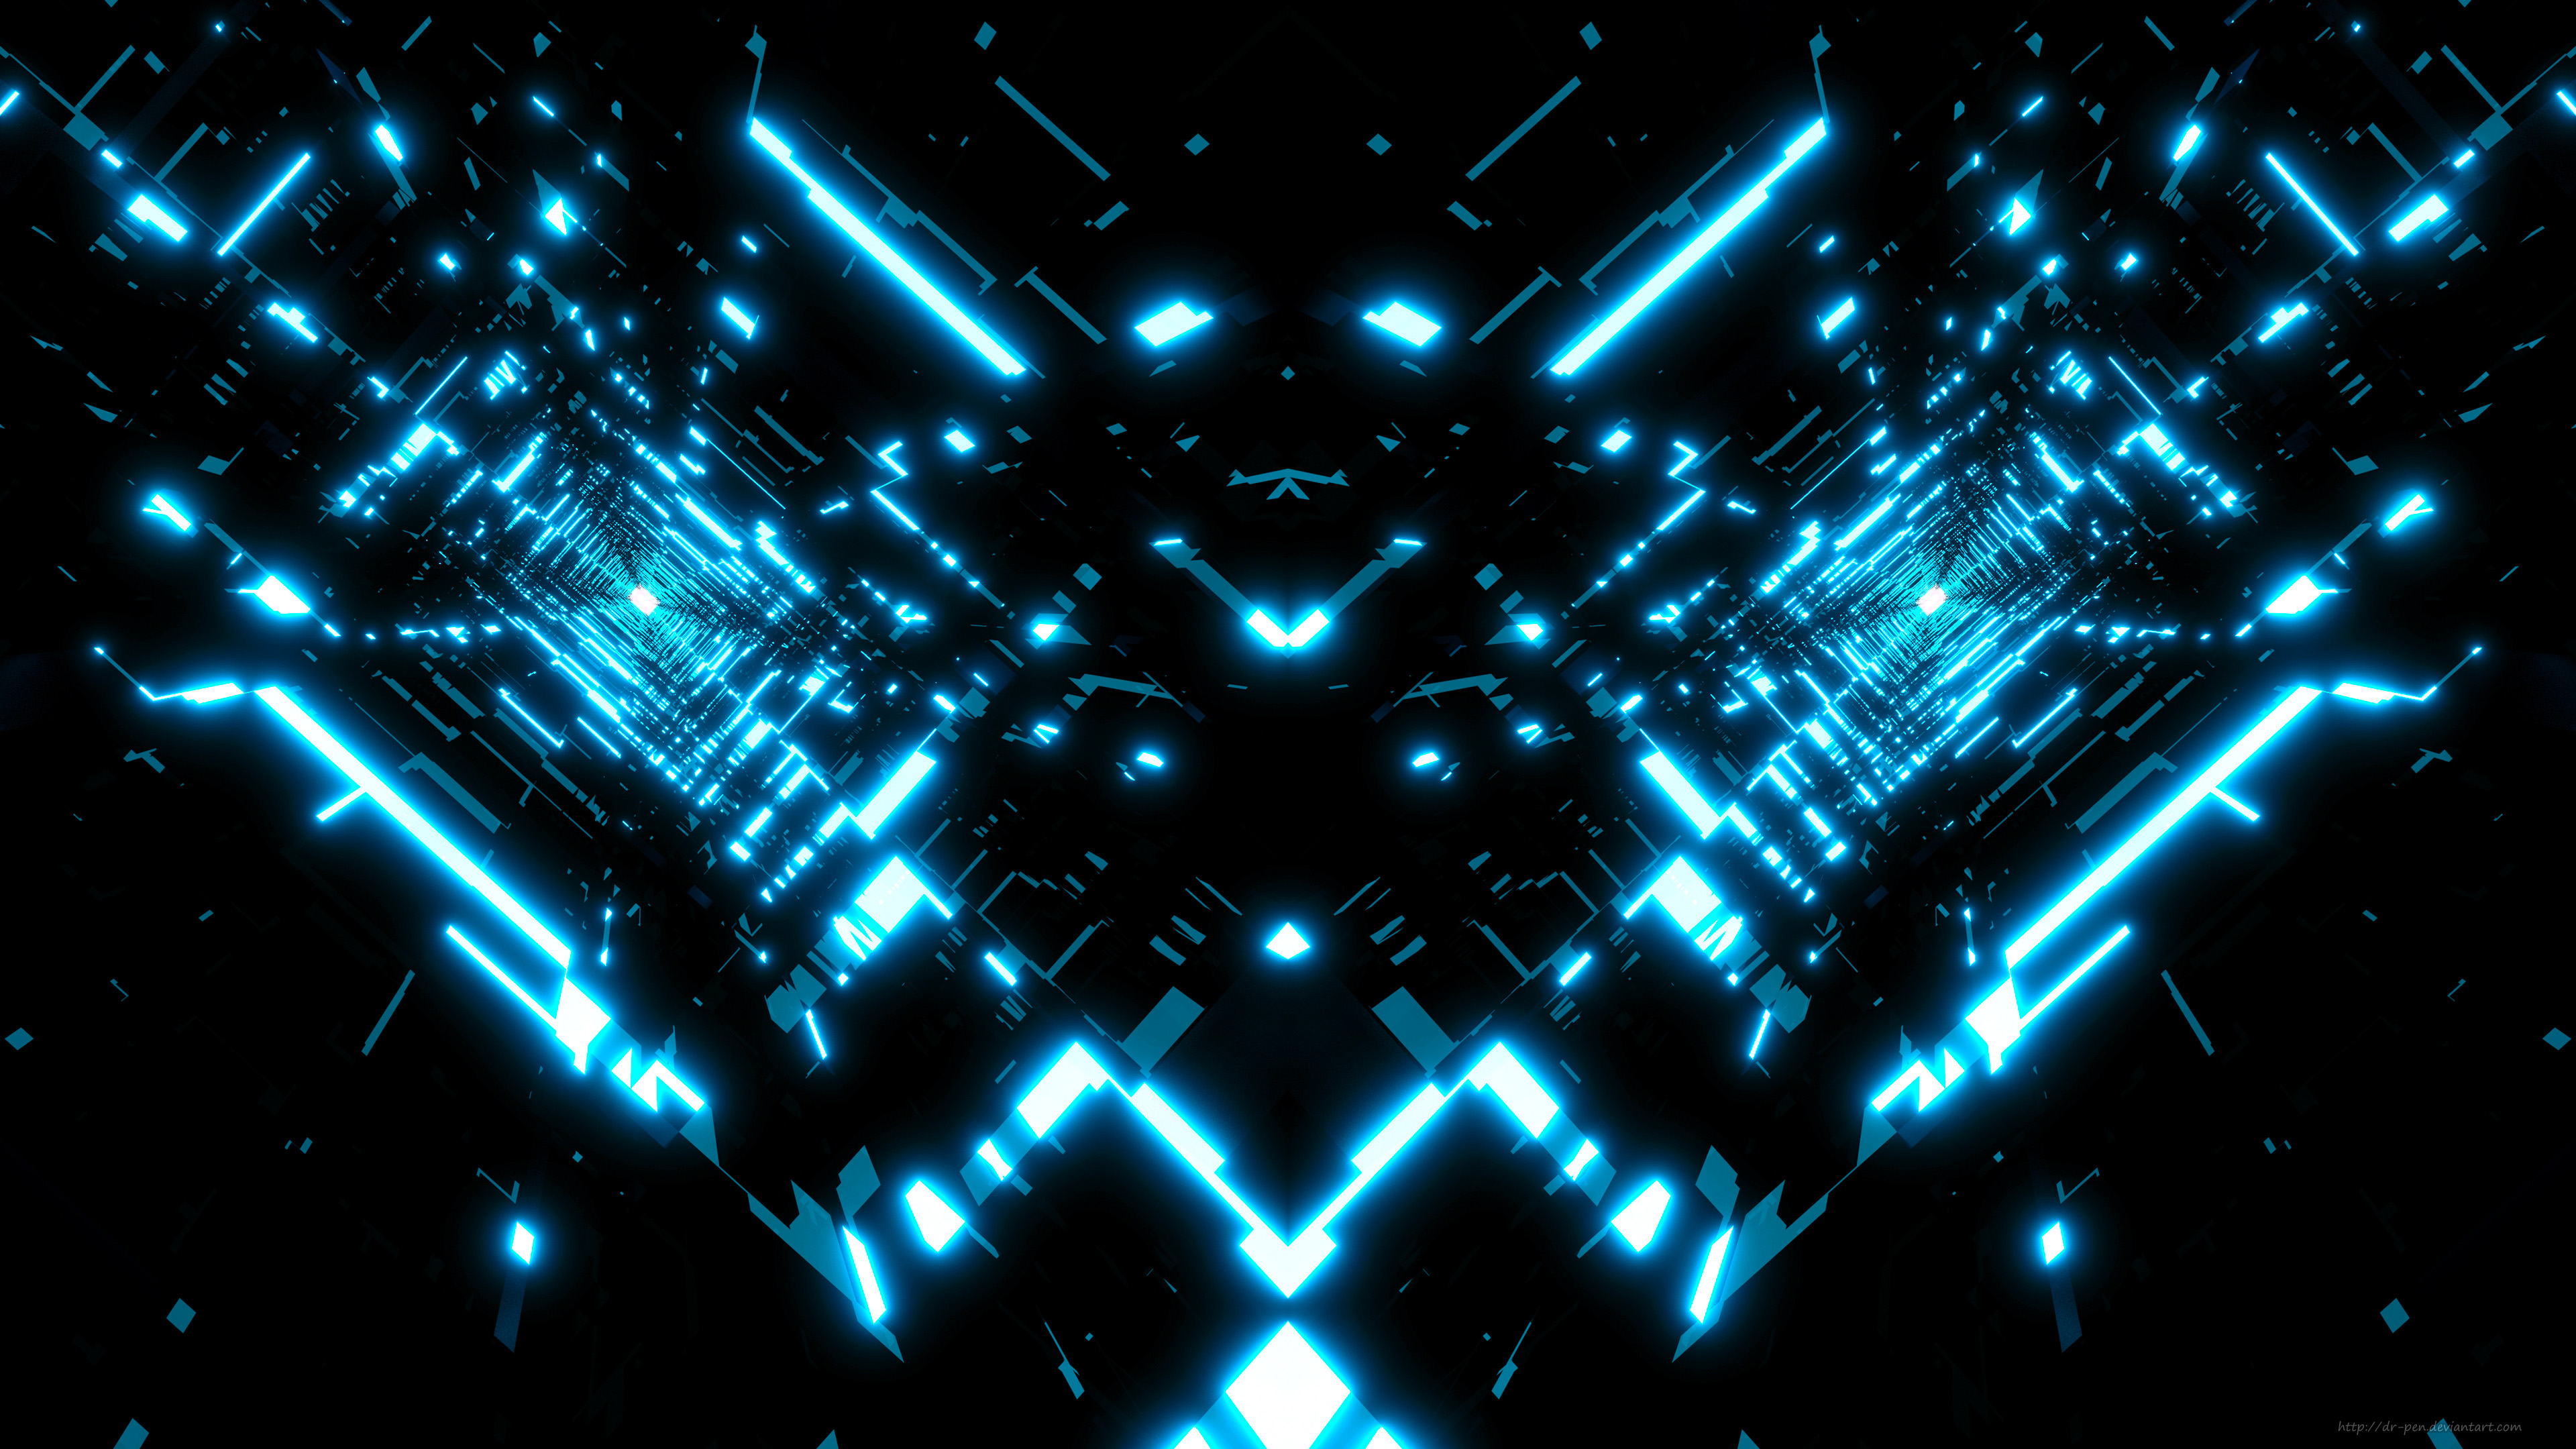 geometry, symmetry, 3d, artistic, abstract, blue, cgi